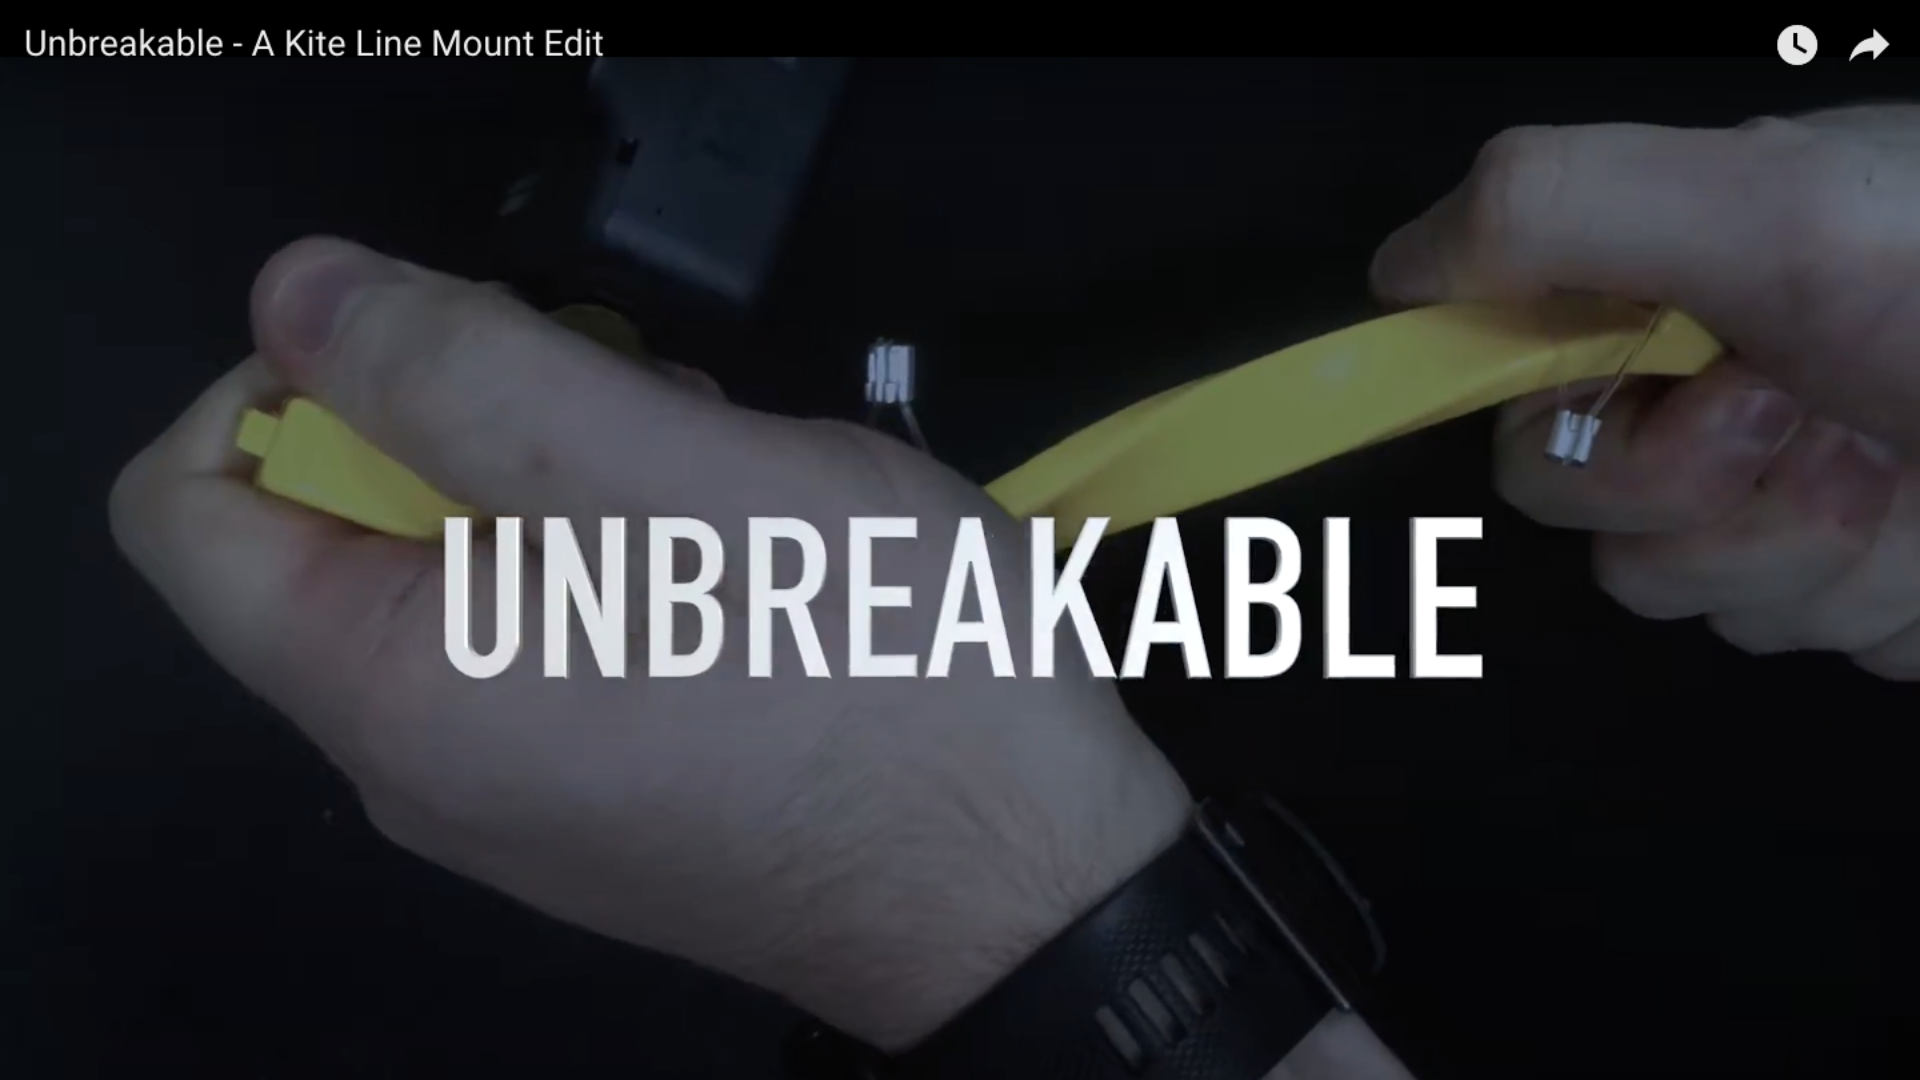 Load video: The Kite Line Mount - Unbreakable